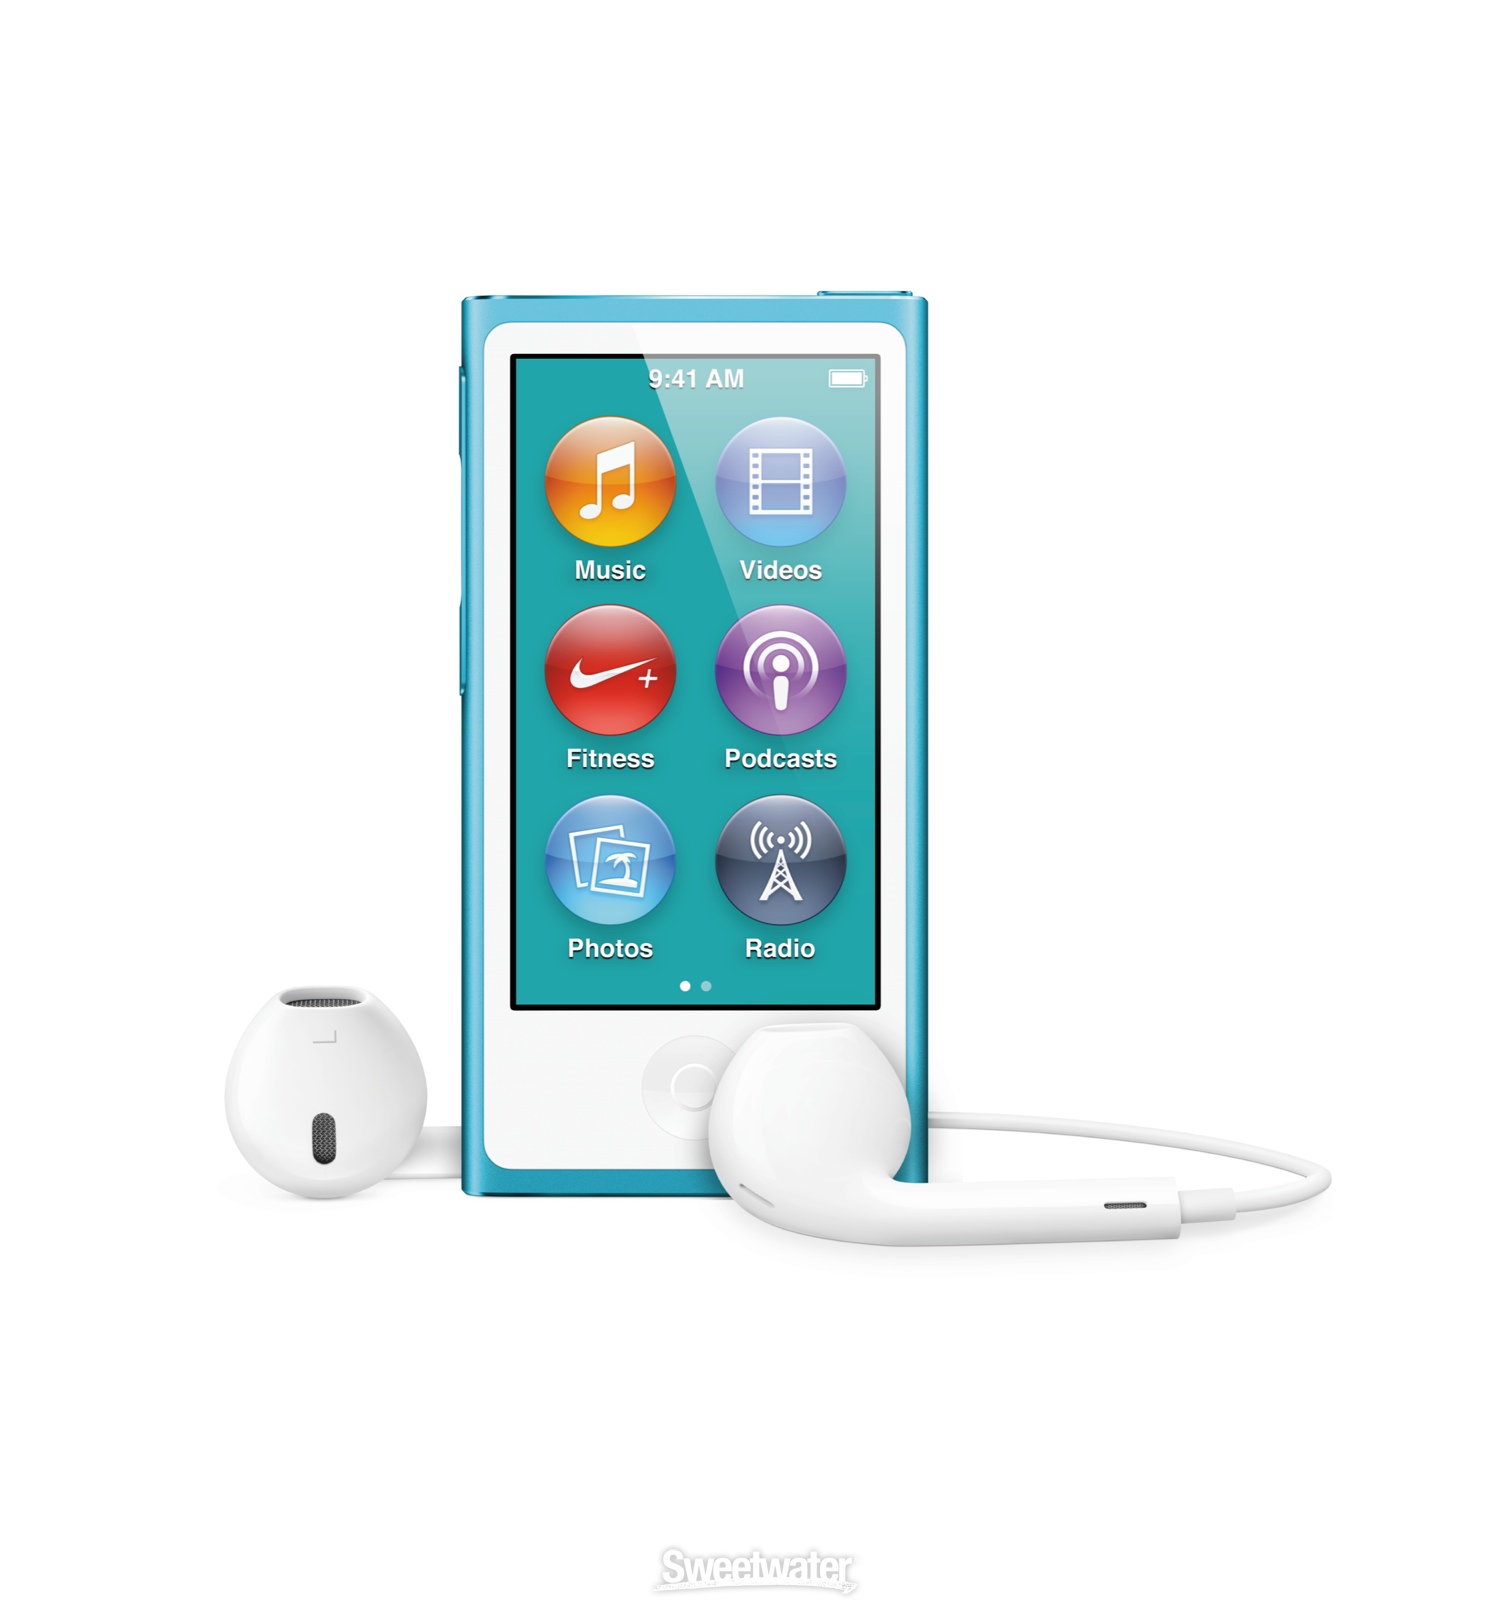 iPod Touch and iPod Nano - 4 inch screen, 40-hour battery, Siri and